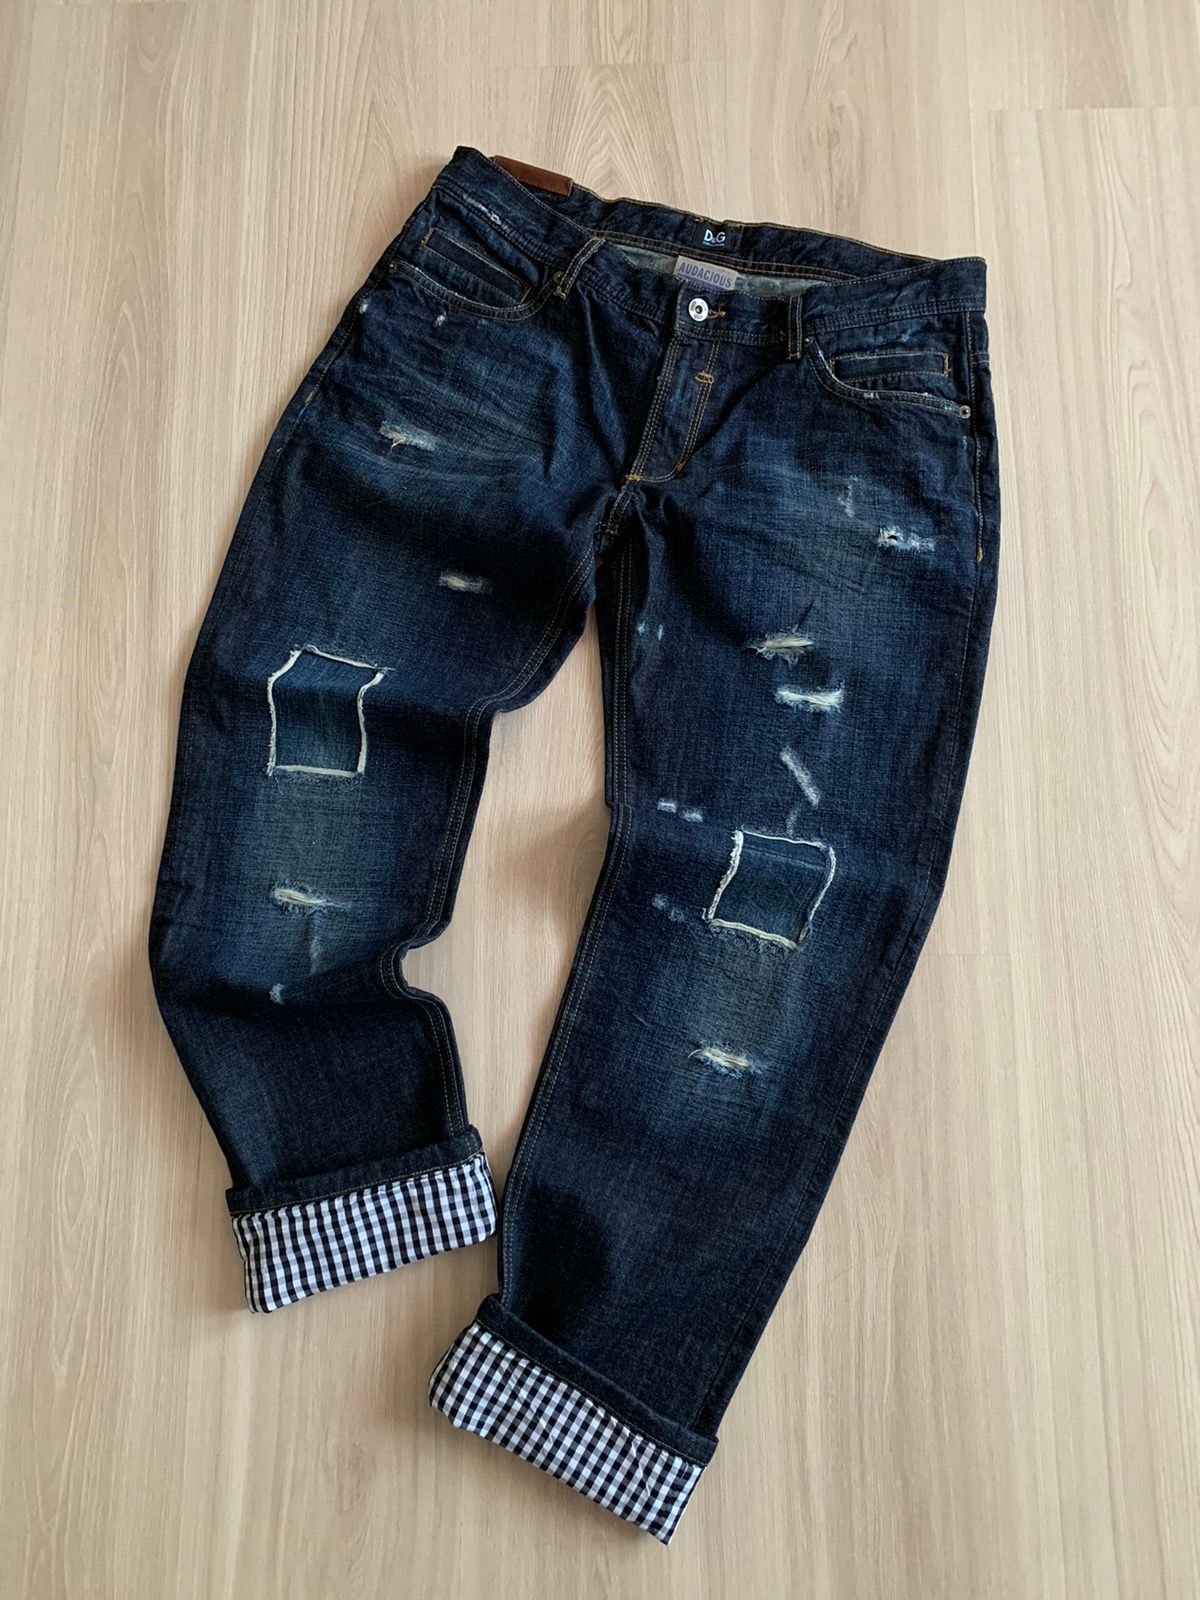 Pre-owned Avant Garde X Dolce Gabbana Vintage Dolce&gabbana Audacious Very Tight Jeans 00s In Navy